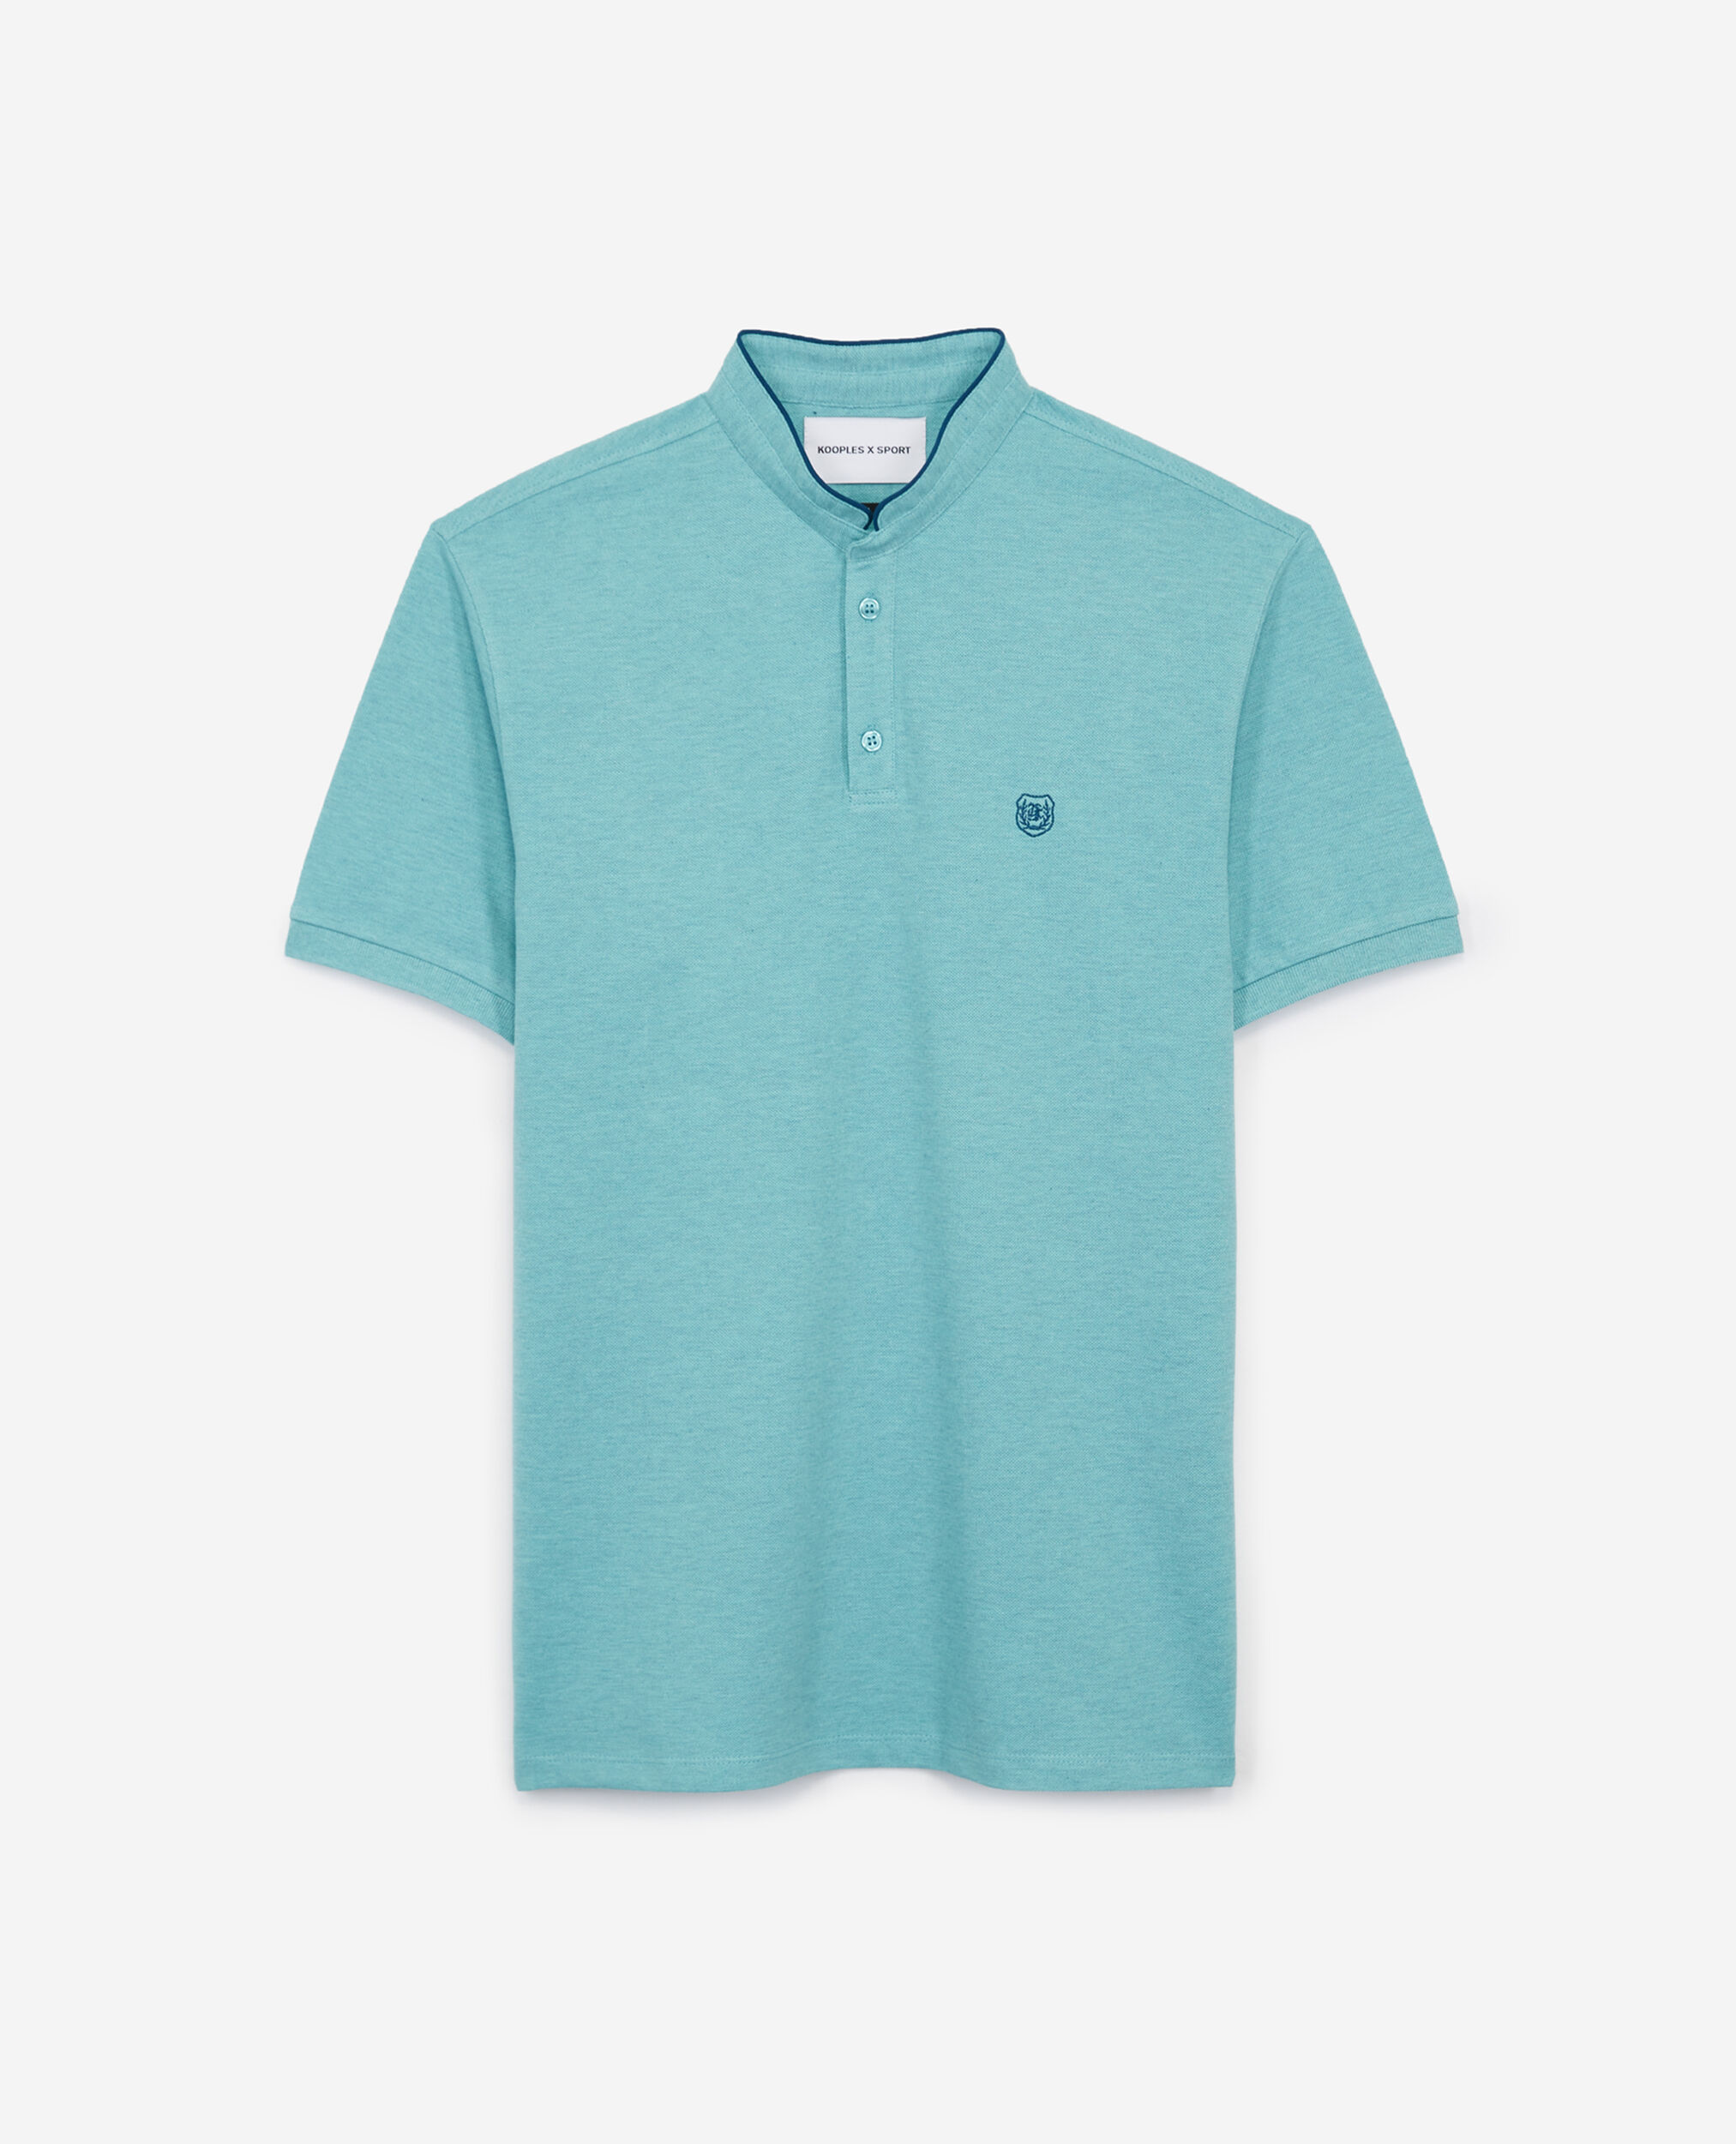 Green jersey polo with contrasting details, AQUA GRN MEL / SAPHIR, hi-res image number null